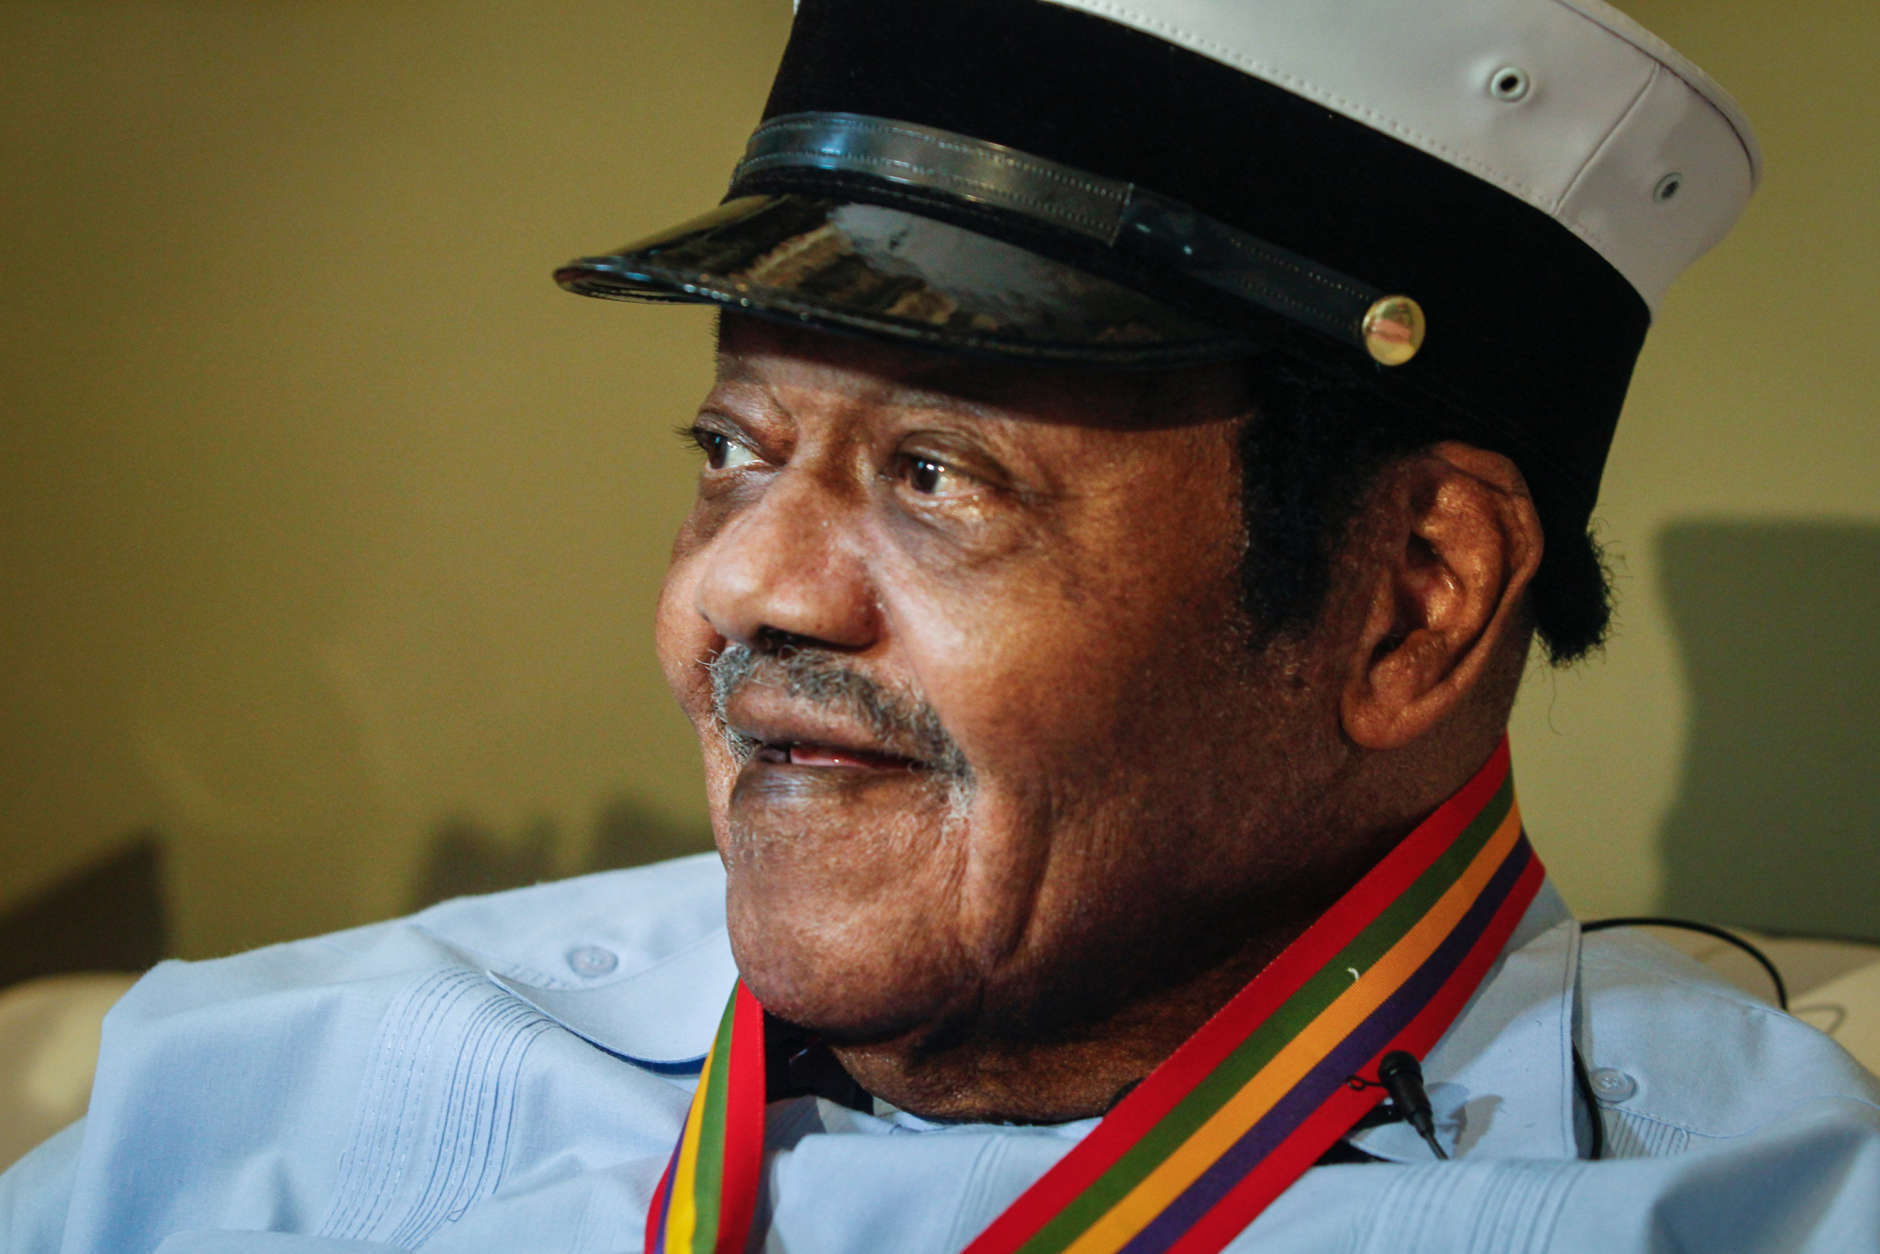 Legendary musician Fats Domino is named  "Honorary Grand Marshall" of the Krewe of Orpheus, the star-studded Carnival club that traditionally parades the night before Mardi Gras, Friday, Dec. 20, 2013 in New Orleans. (AP Photo/Doug Parker).